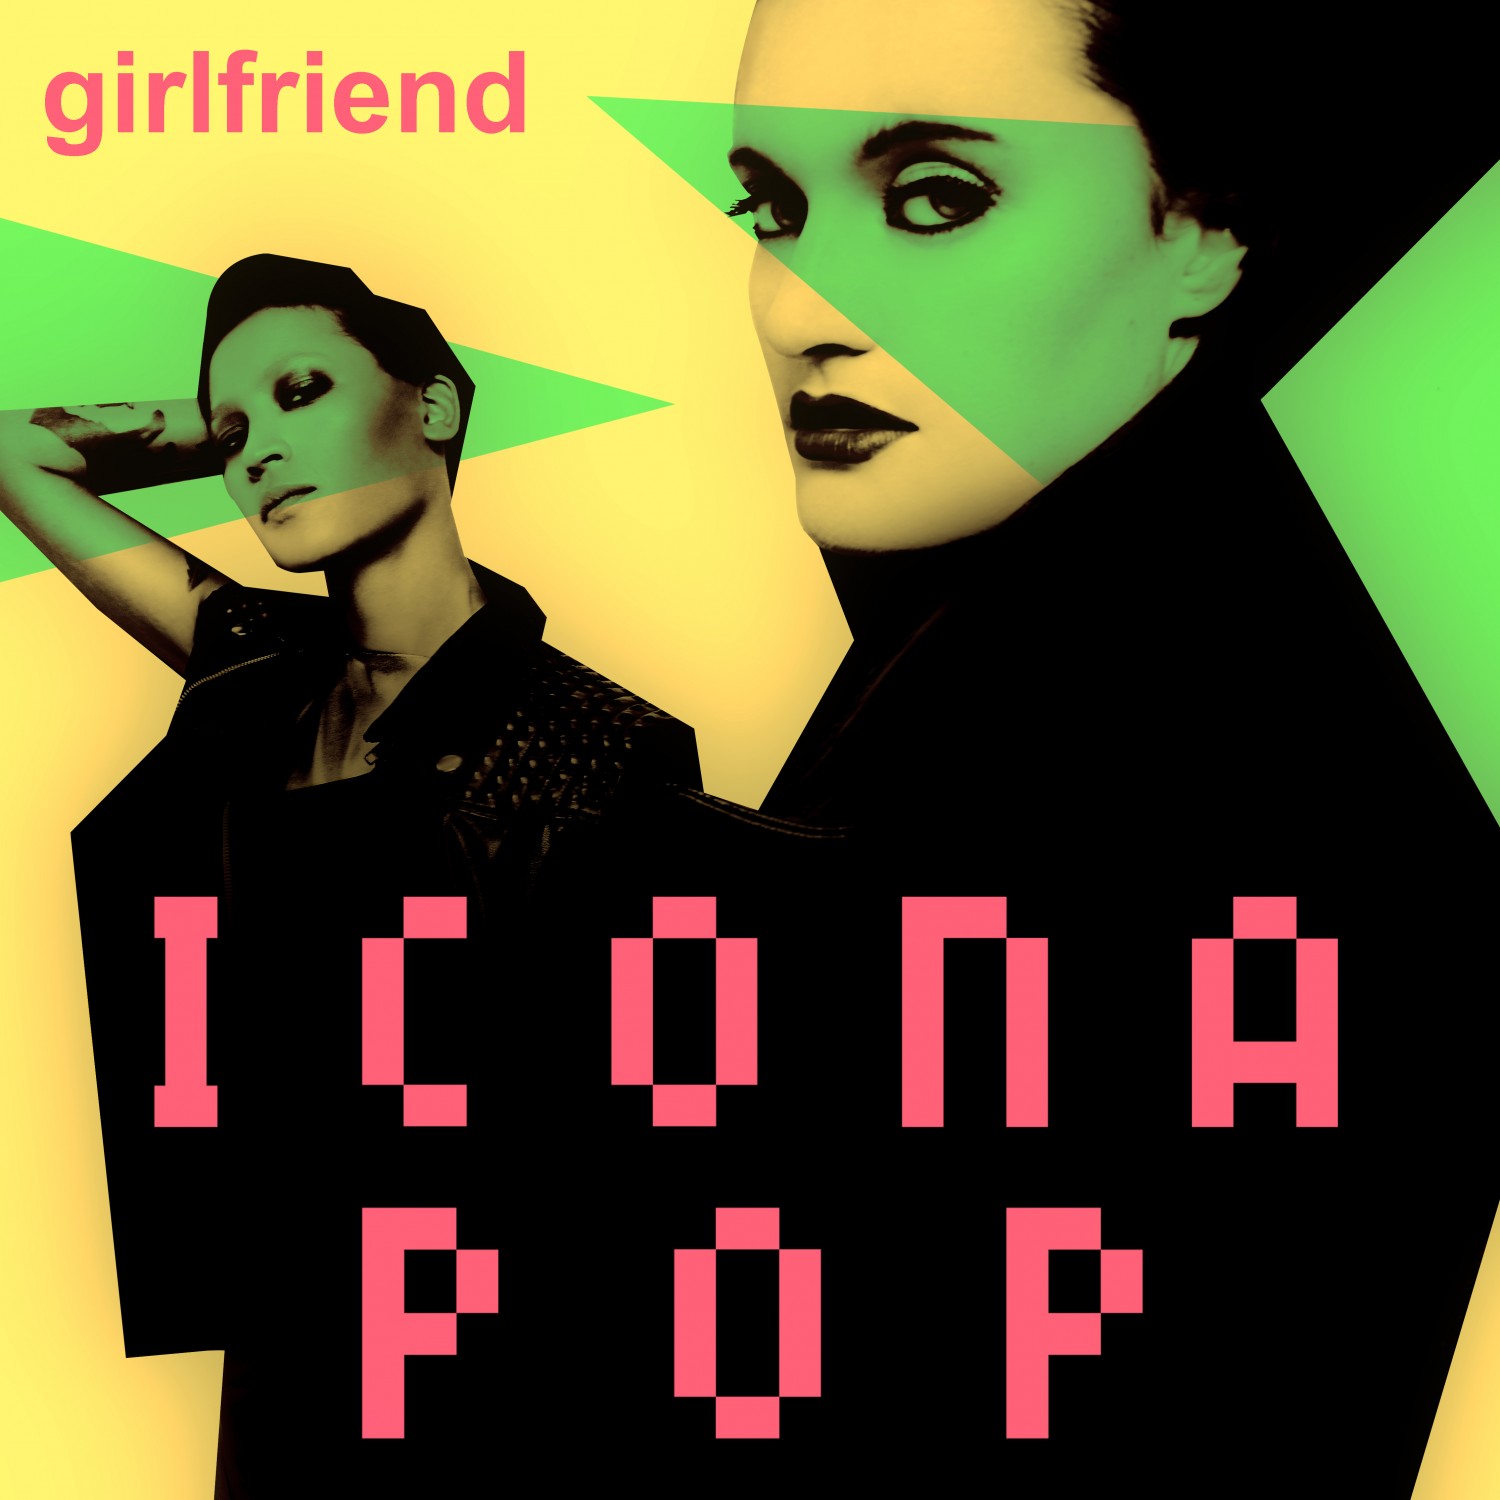 Cover picture for single Girlfriend by Icona Pop By Fredrik Etoall